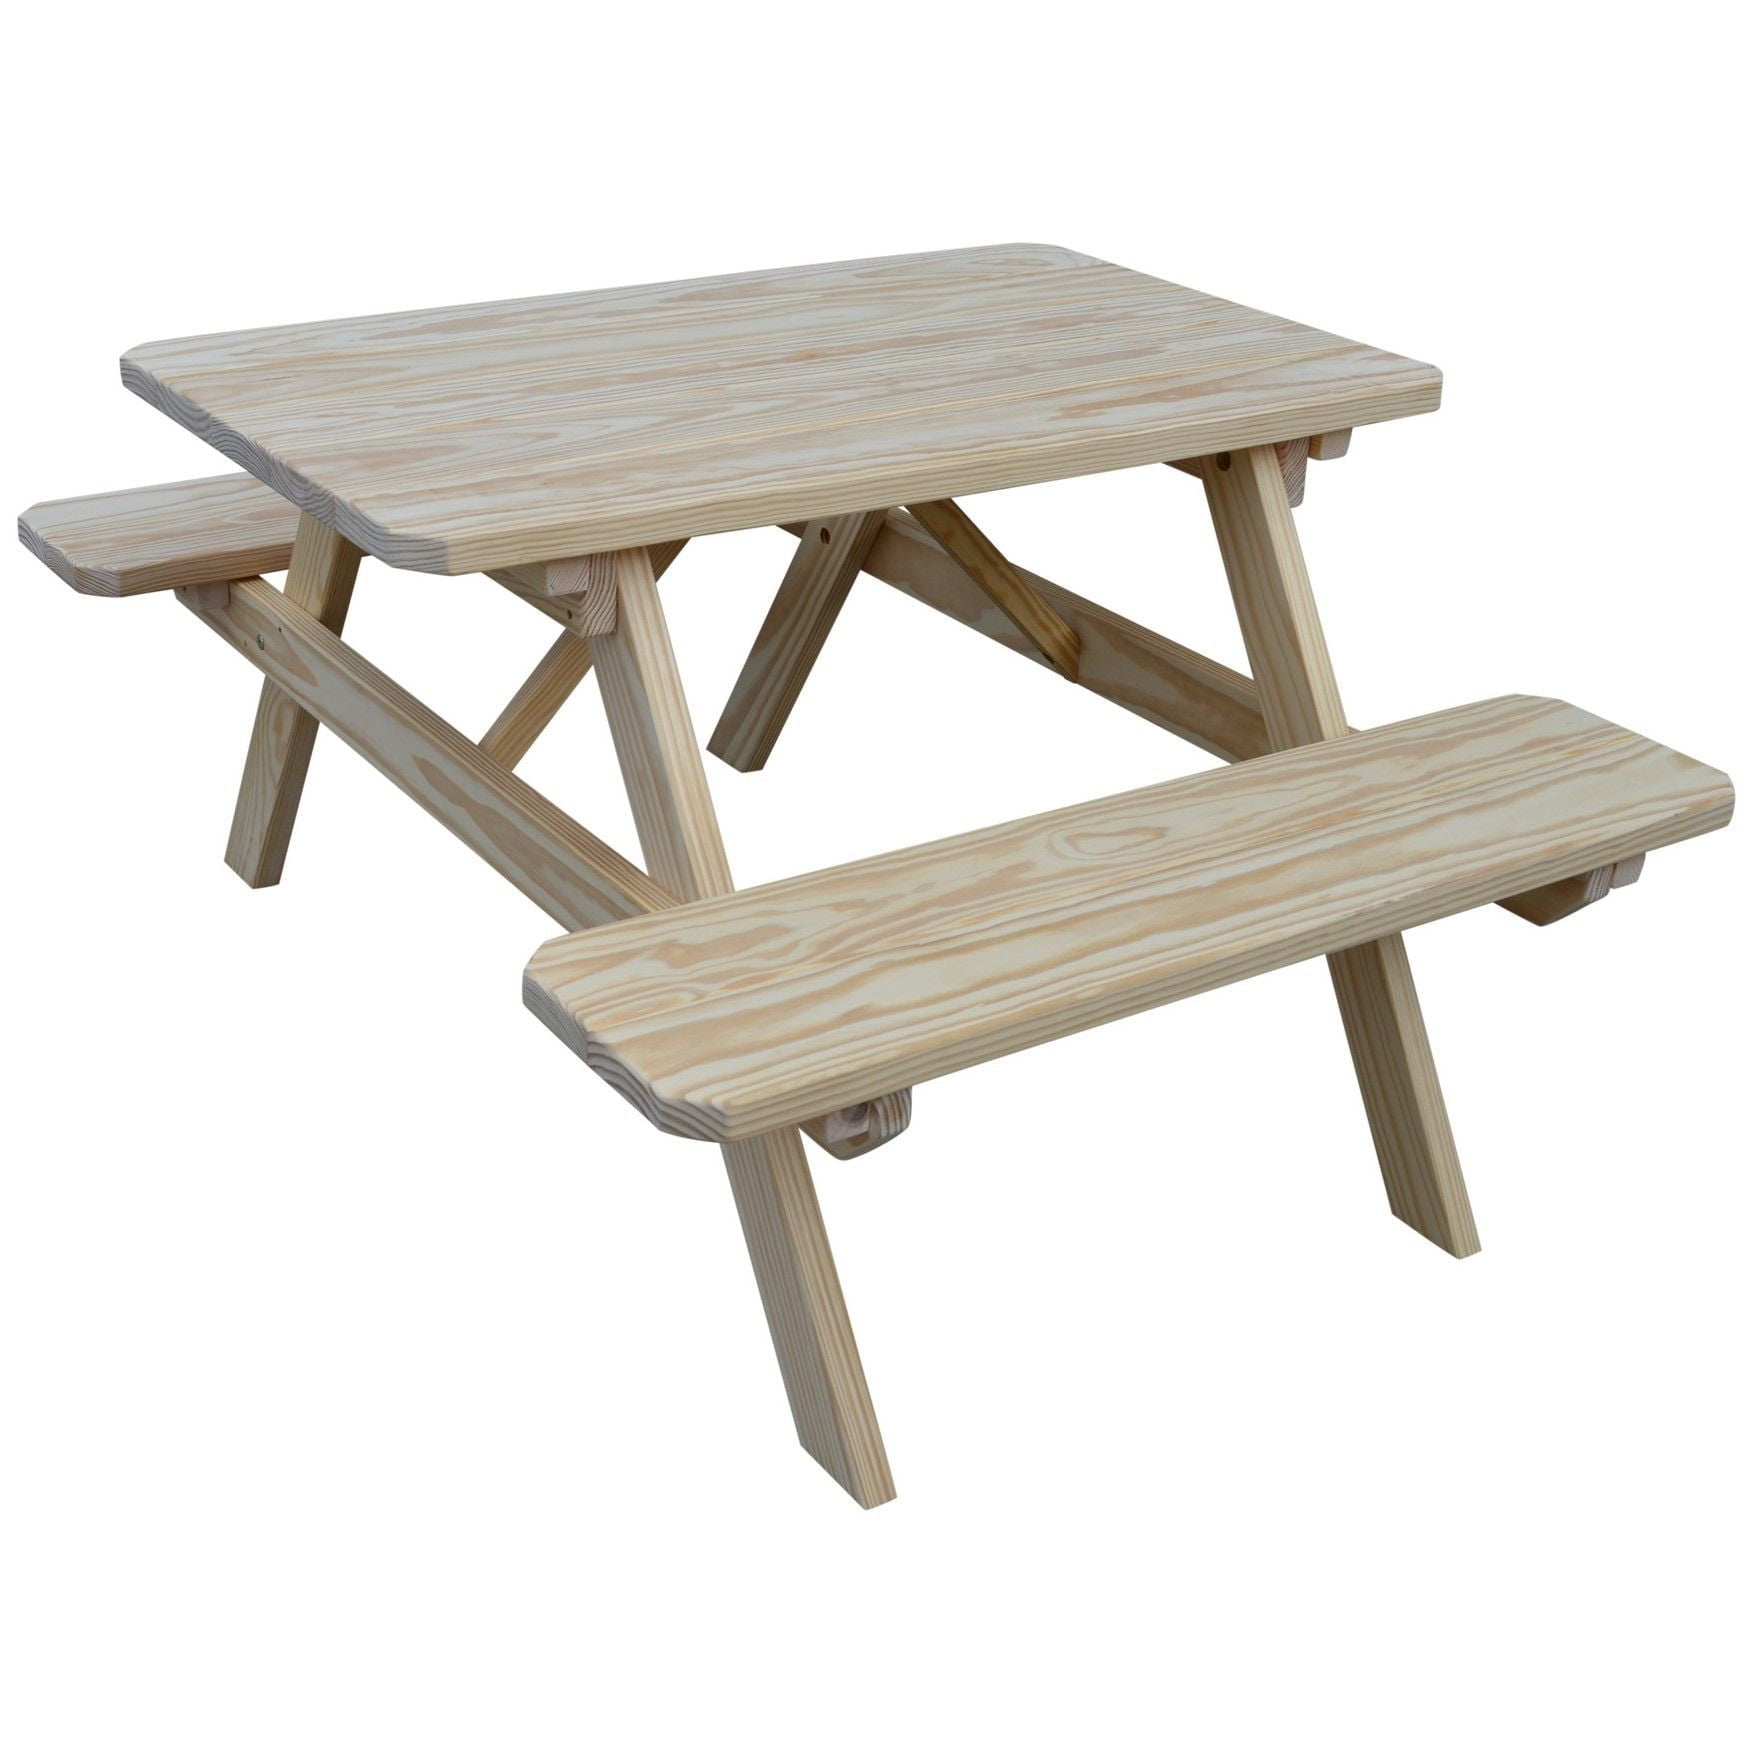 Cedar Picnic Table with Attached Benches